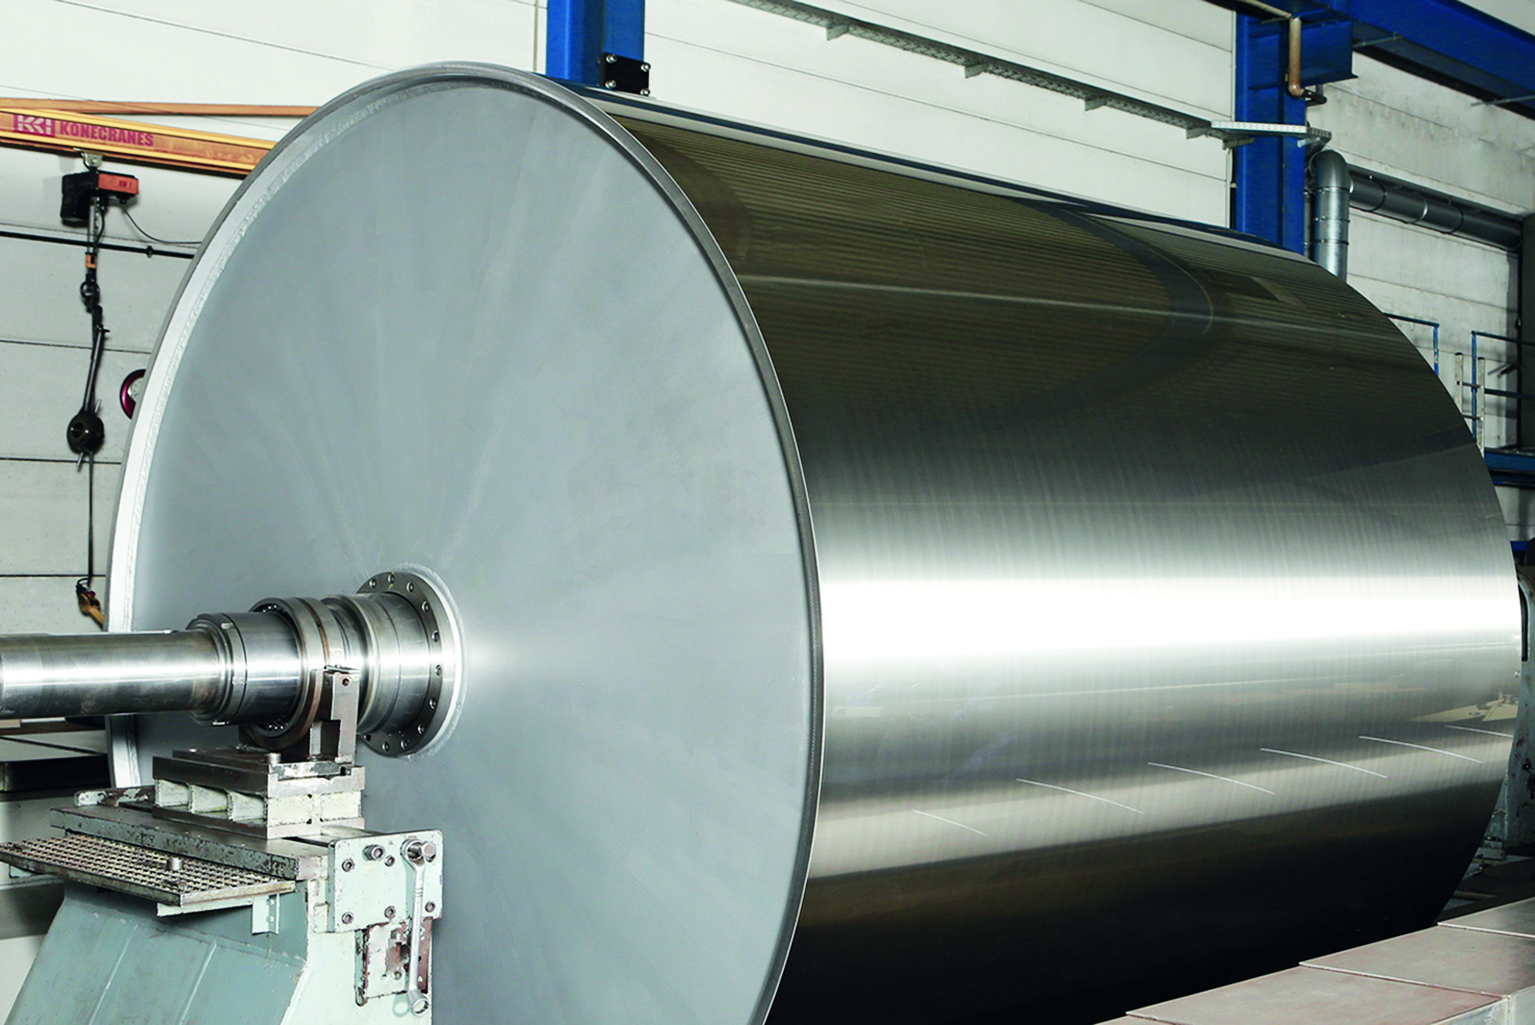 In the future, suitable system technology will also allow very large, long rollers with a diameter of up to 3,000 mm to be reliably coated close to the final contour.